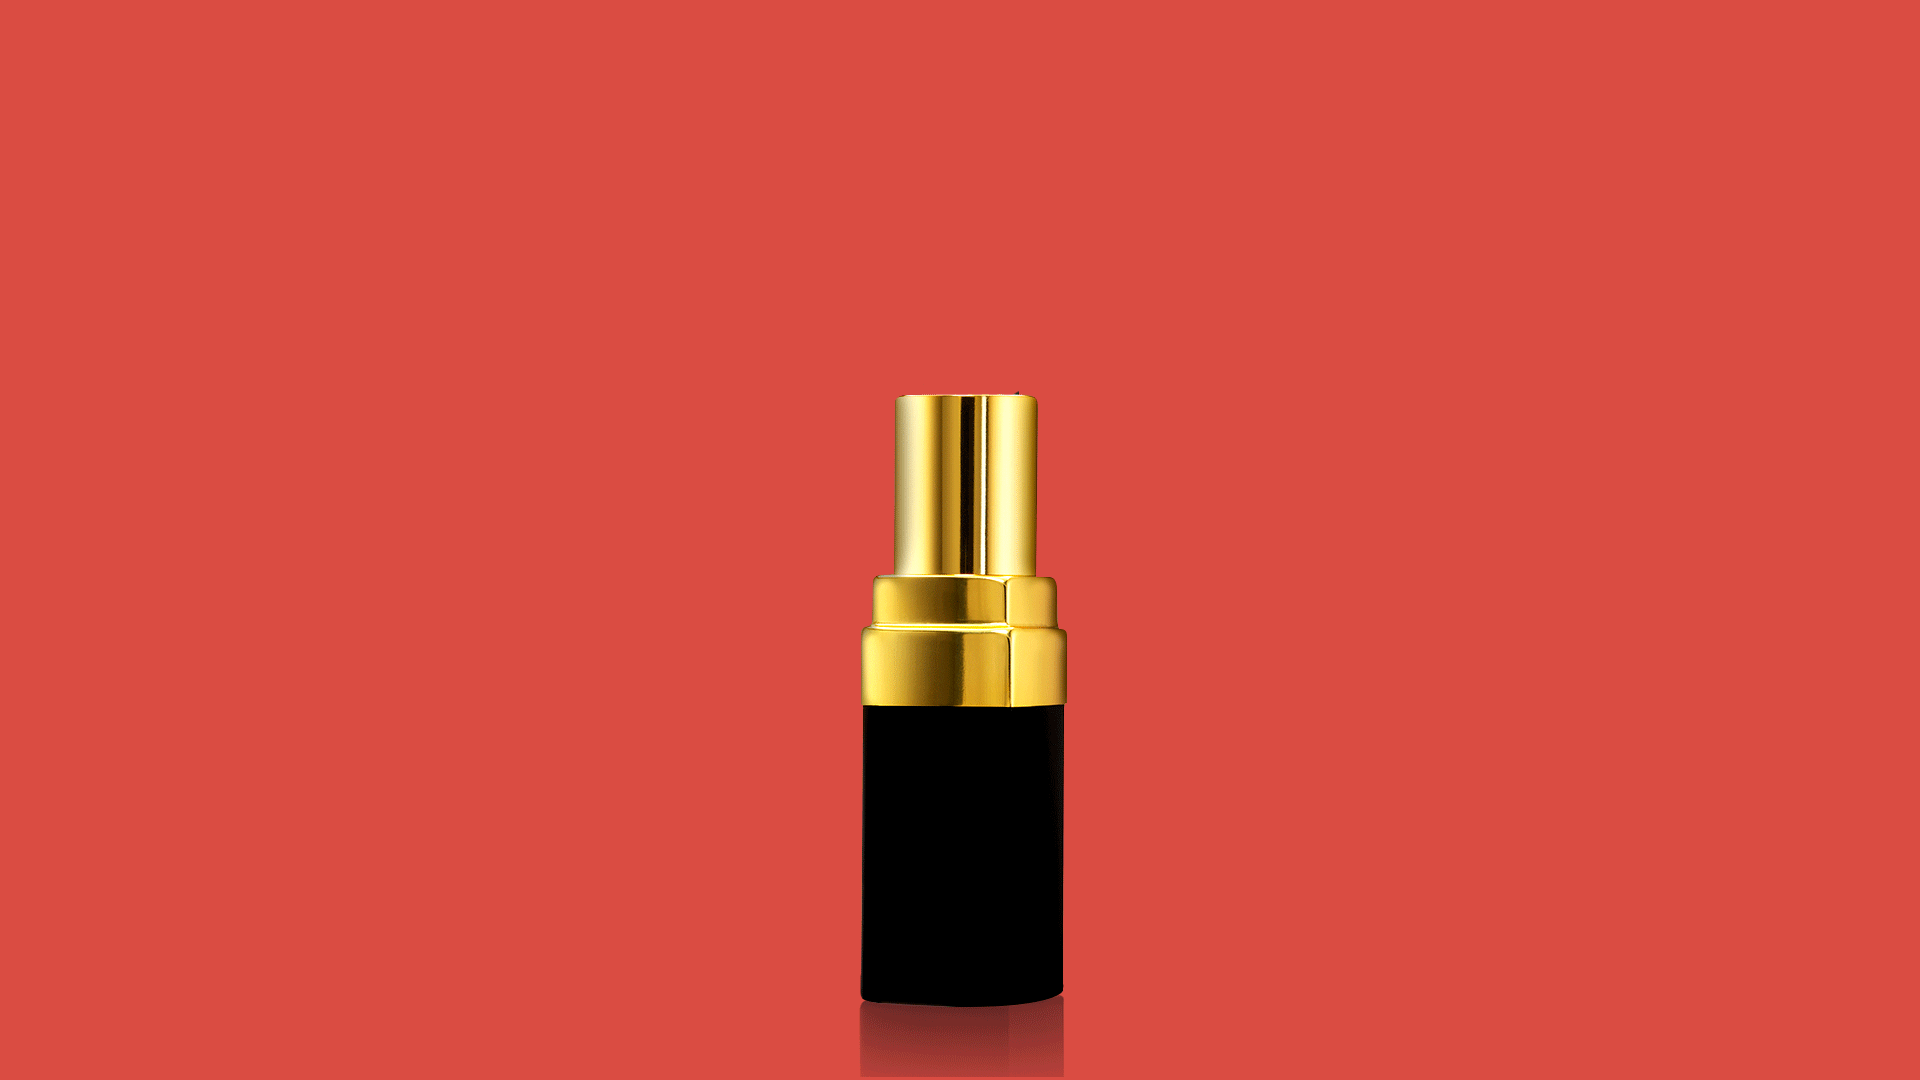 Illustration of lipstick in the shape of a dollar